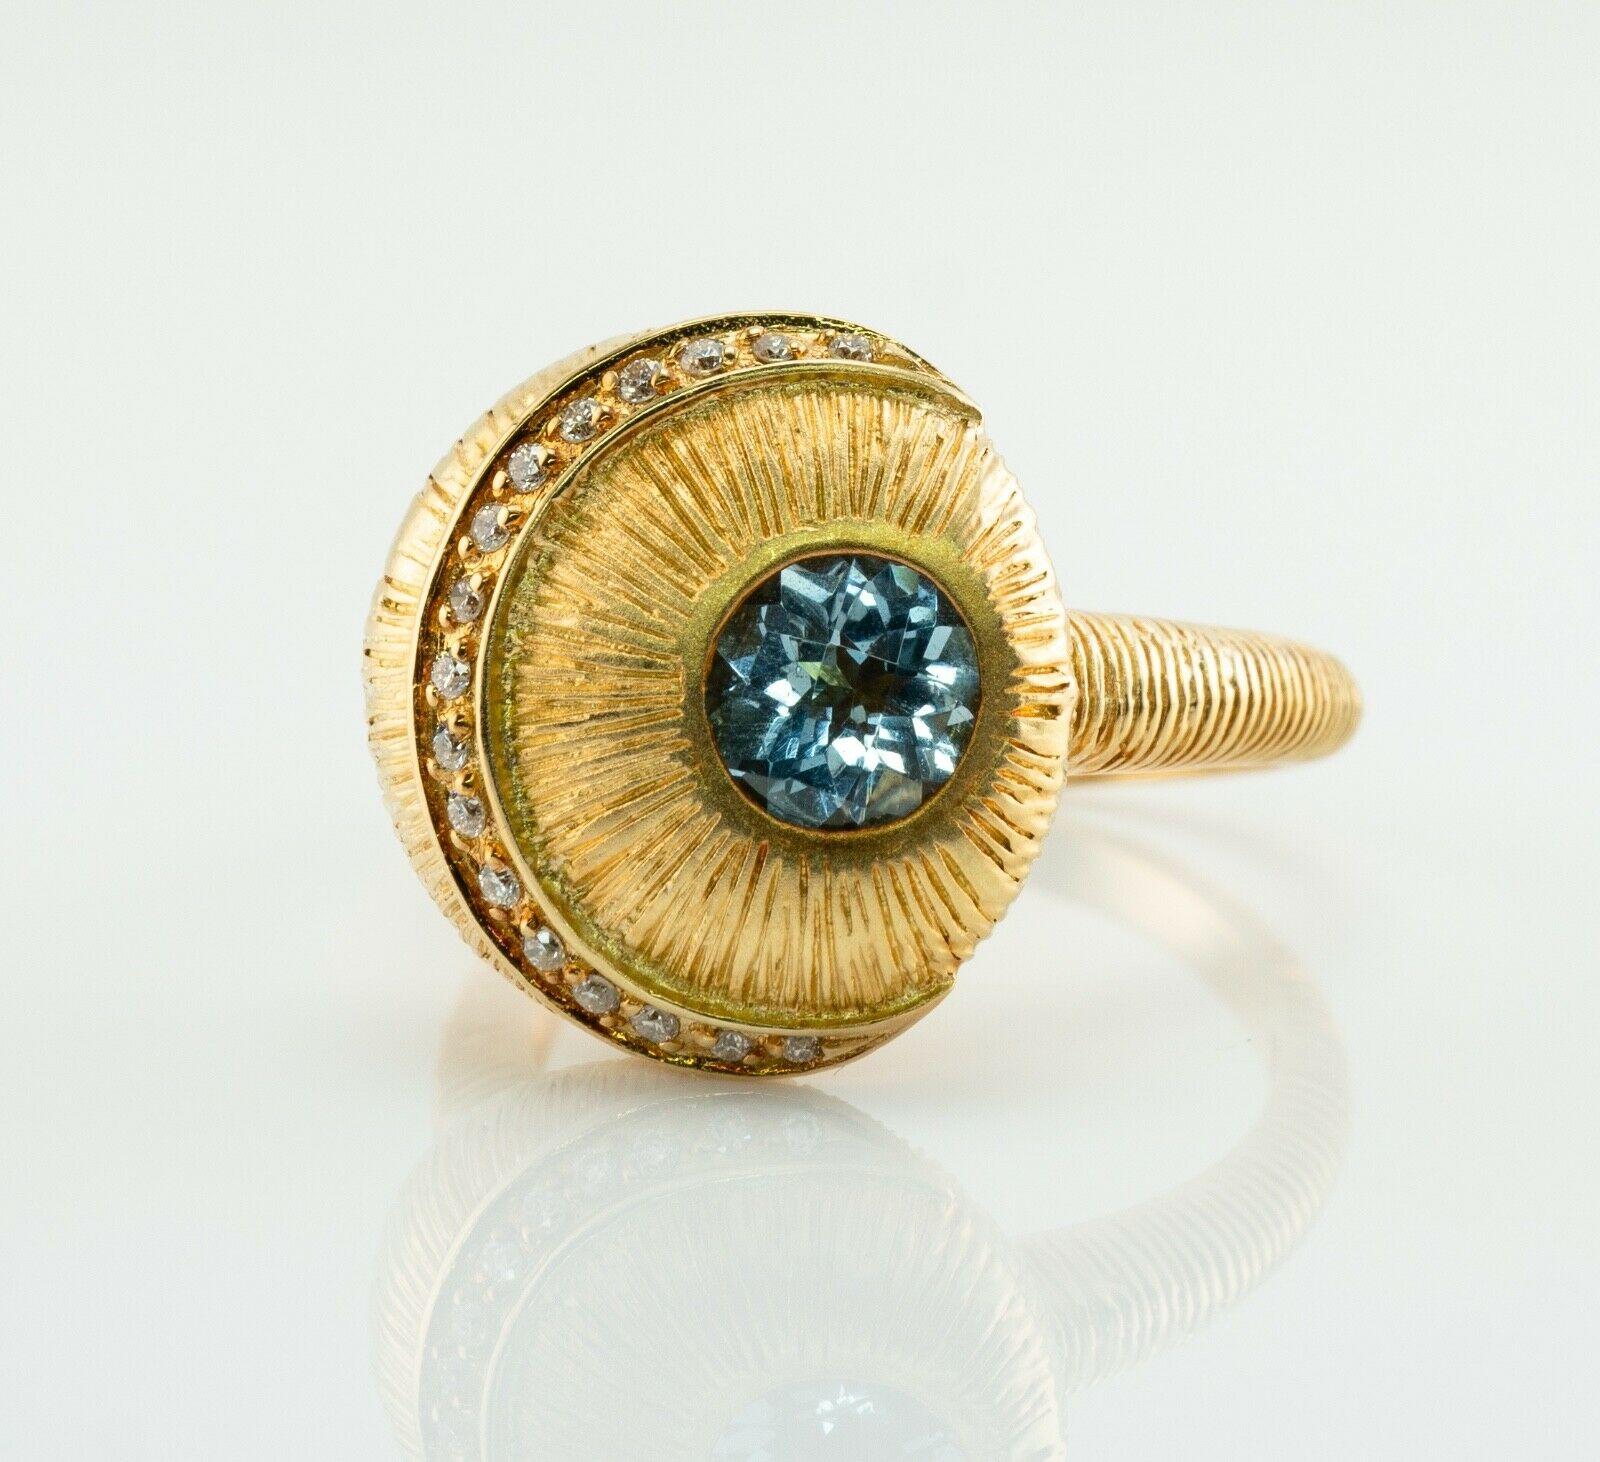 This spectacular vintage ring is finely crafted in solid 18K Yellow Gold and set with natural Earth mined Aquamarine and diamonds. The round checkerboard cut aqua measures 6mm (.75 carat). Seventeen round brilliant cut diamonds are VS2 clarity and H